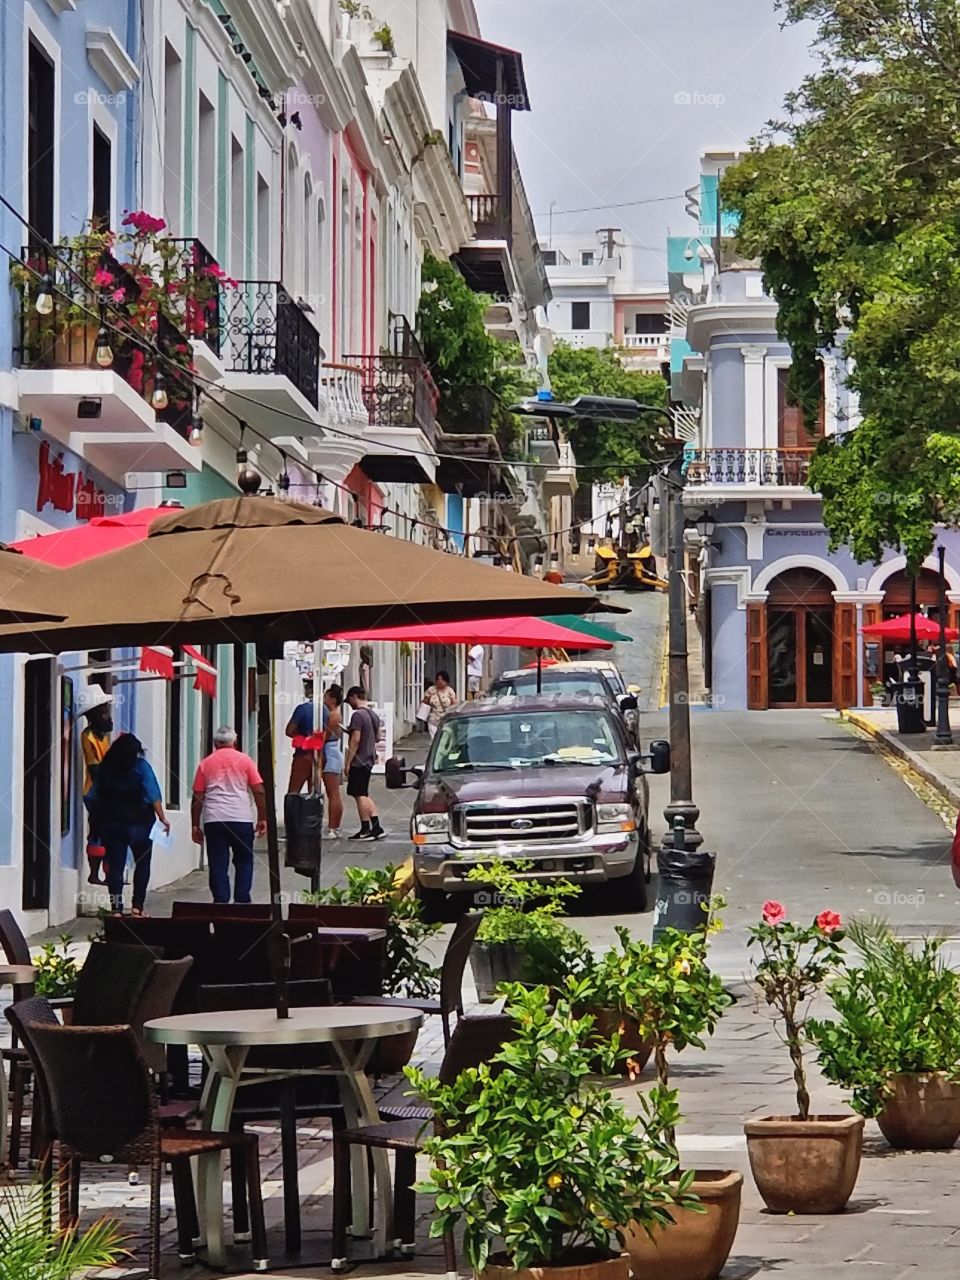 Shopping and Sightseeing in Old San Juan